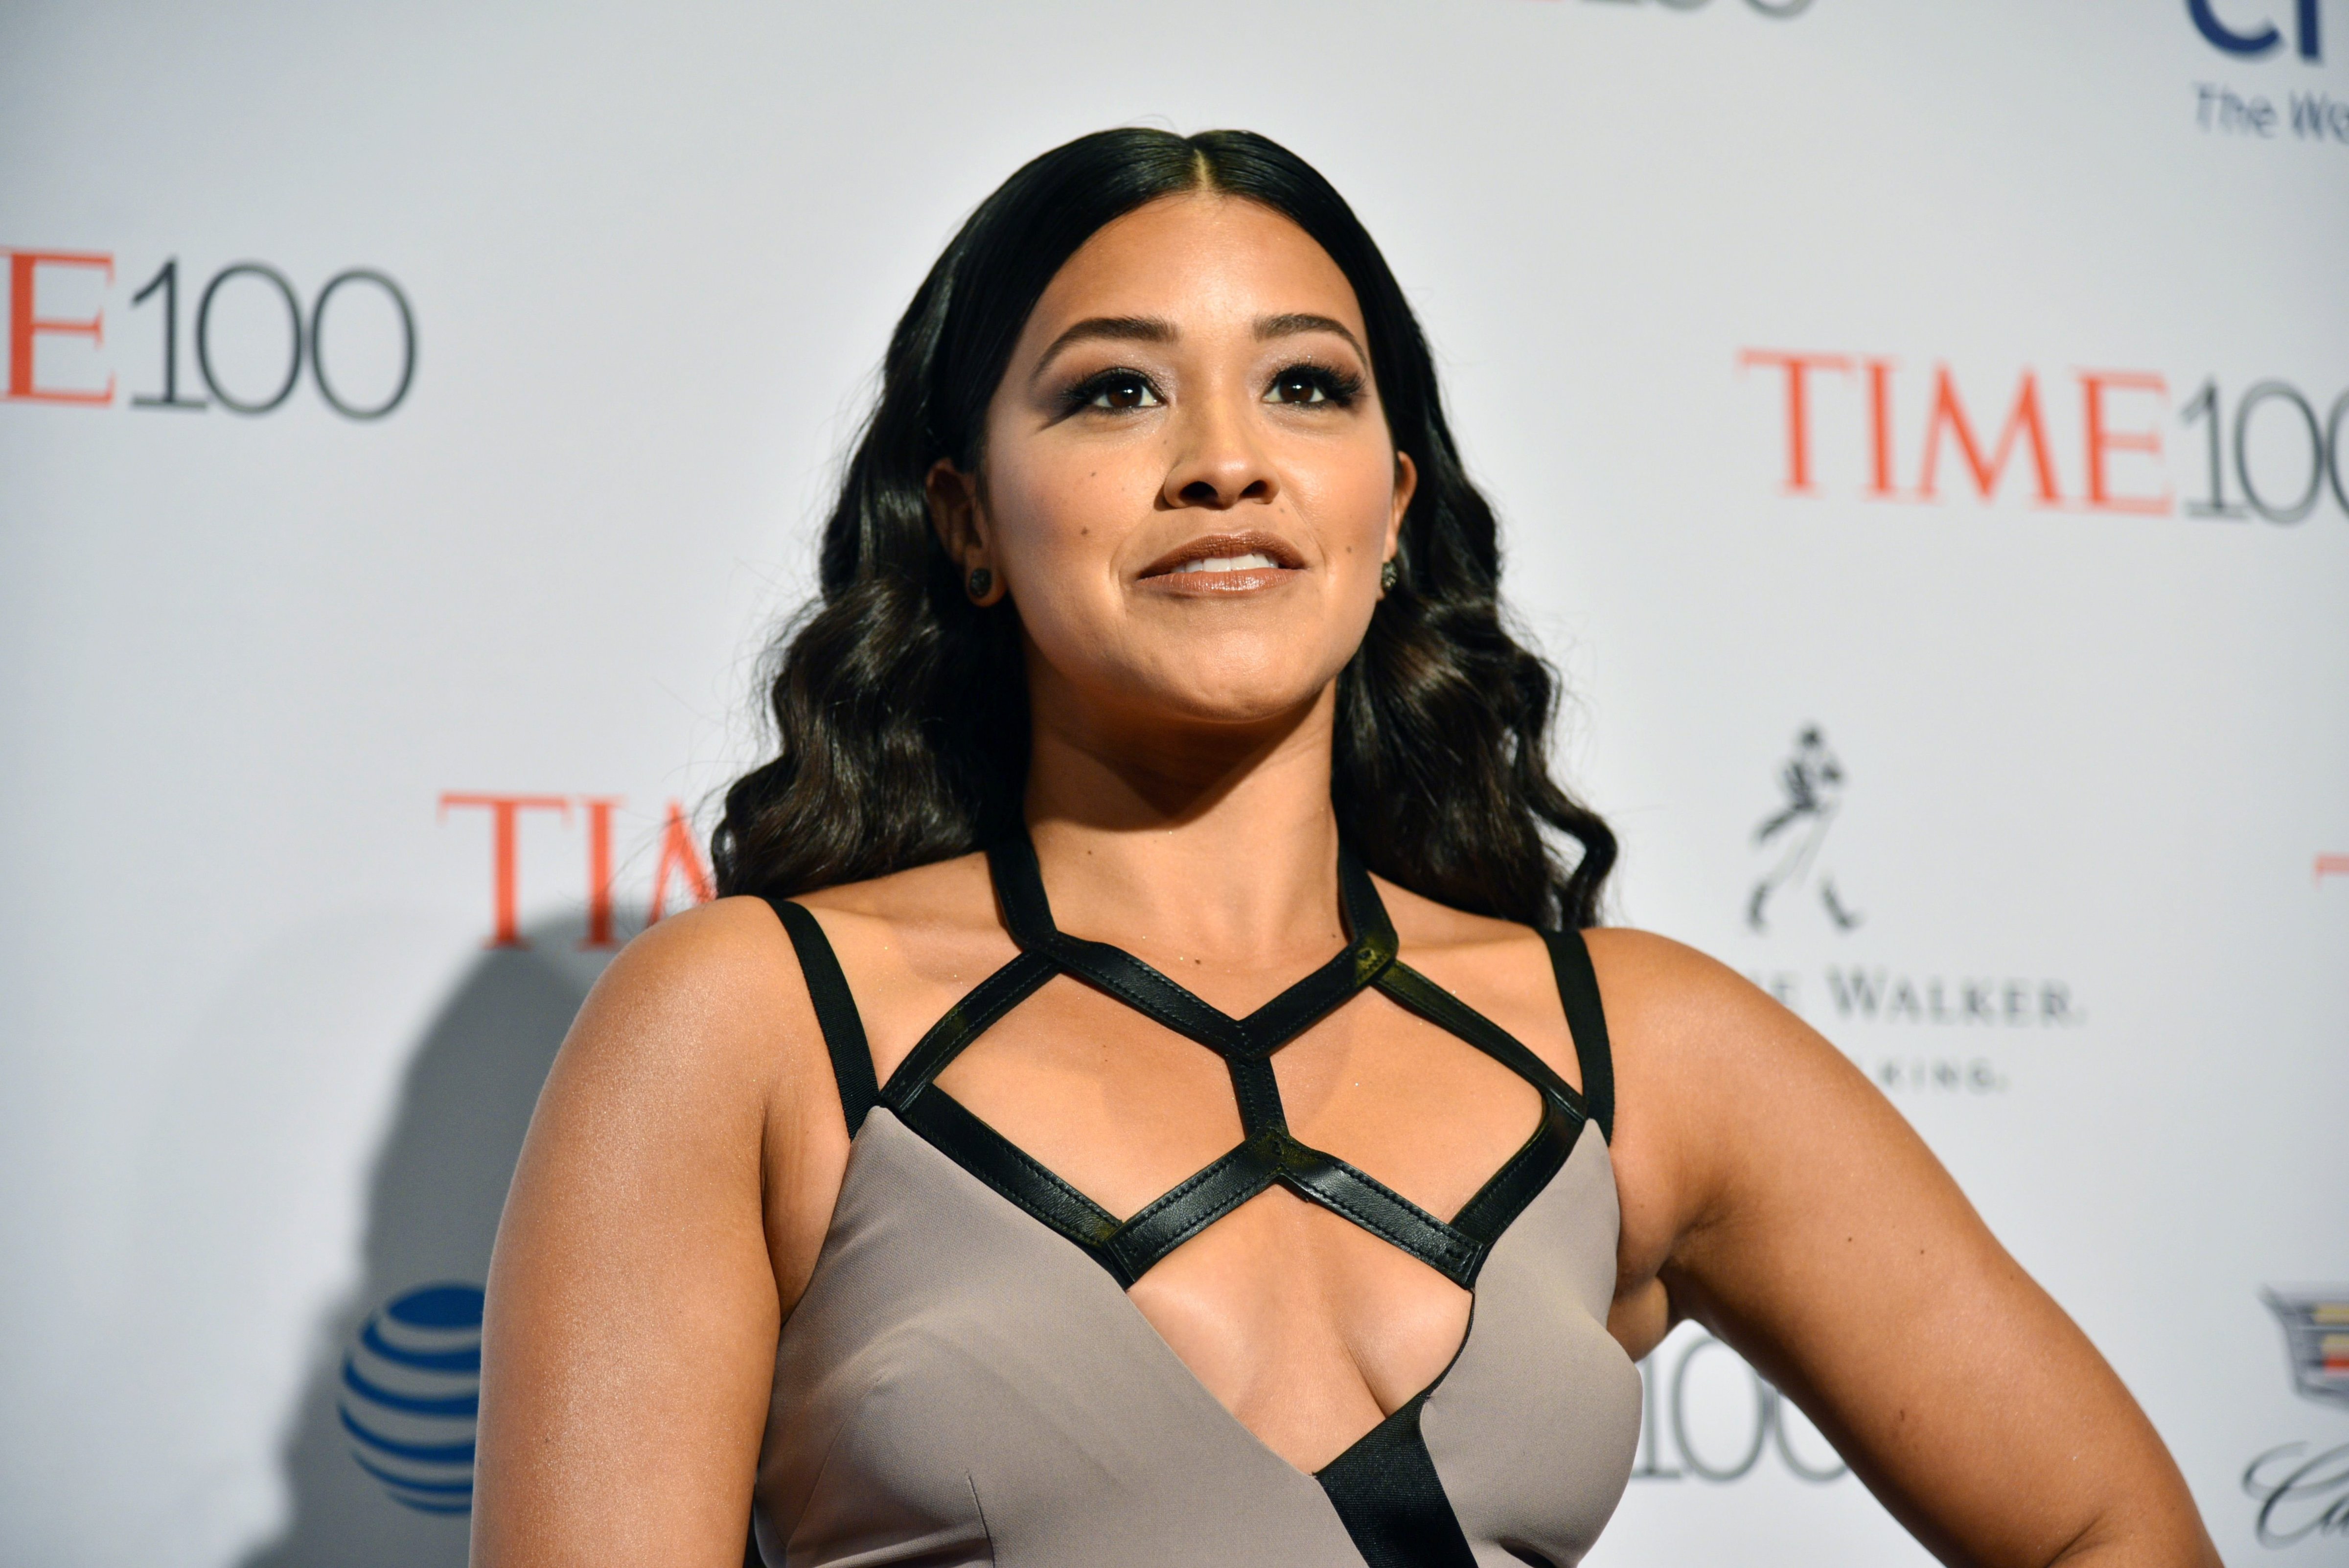 Gina Rodriguez at the TIME 100 gala in New York on April 26, 2016. (Erik Pendzich—REX/Shutterstock)